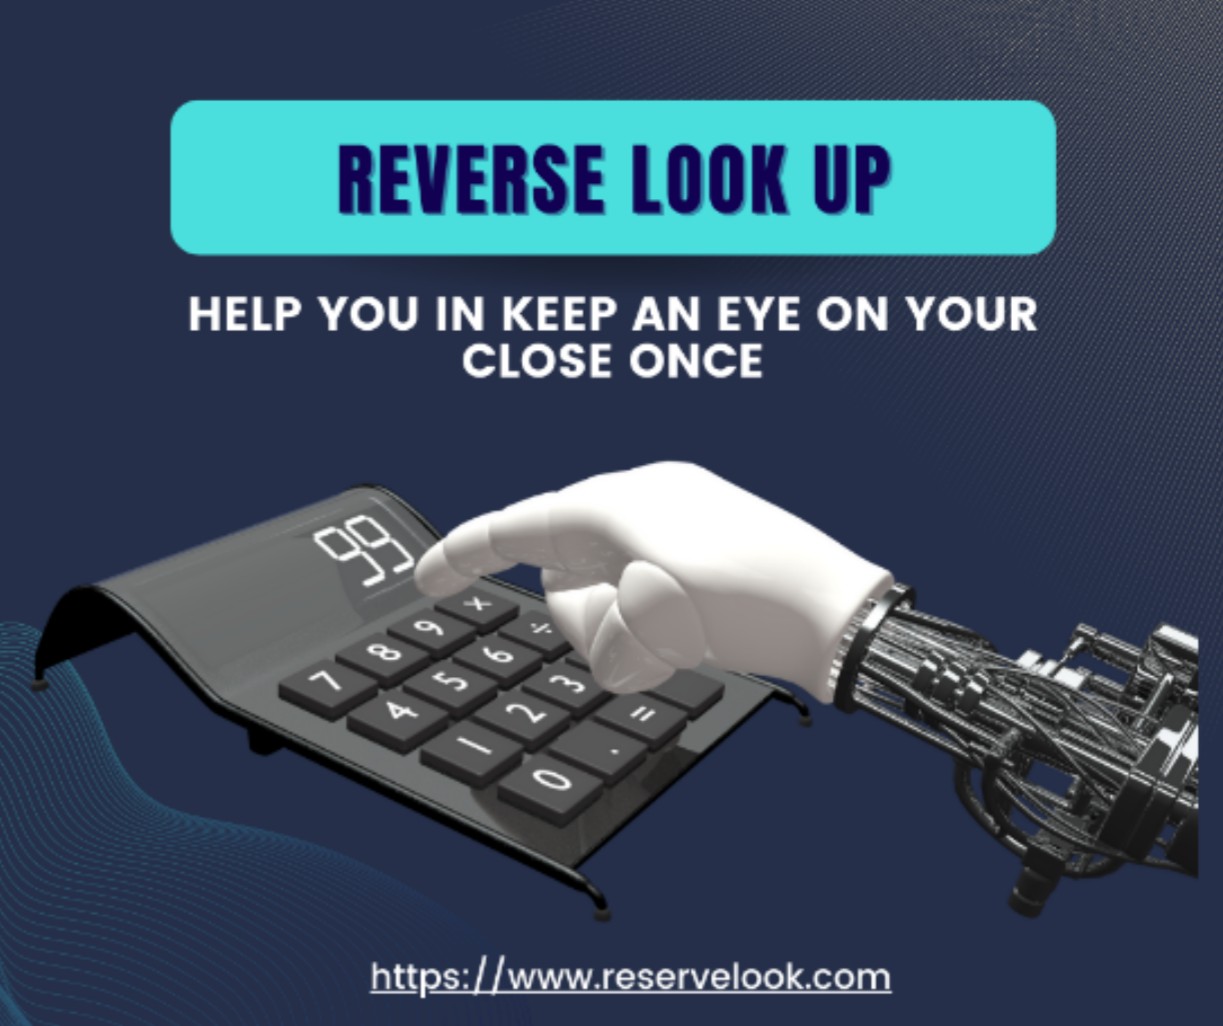 Reserve Look-Up: Help You In Keep An Eye On Your Close Once